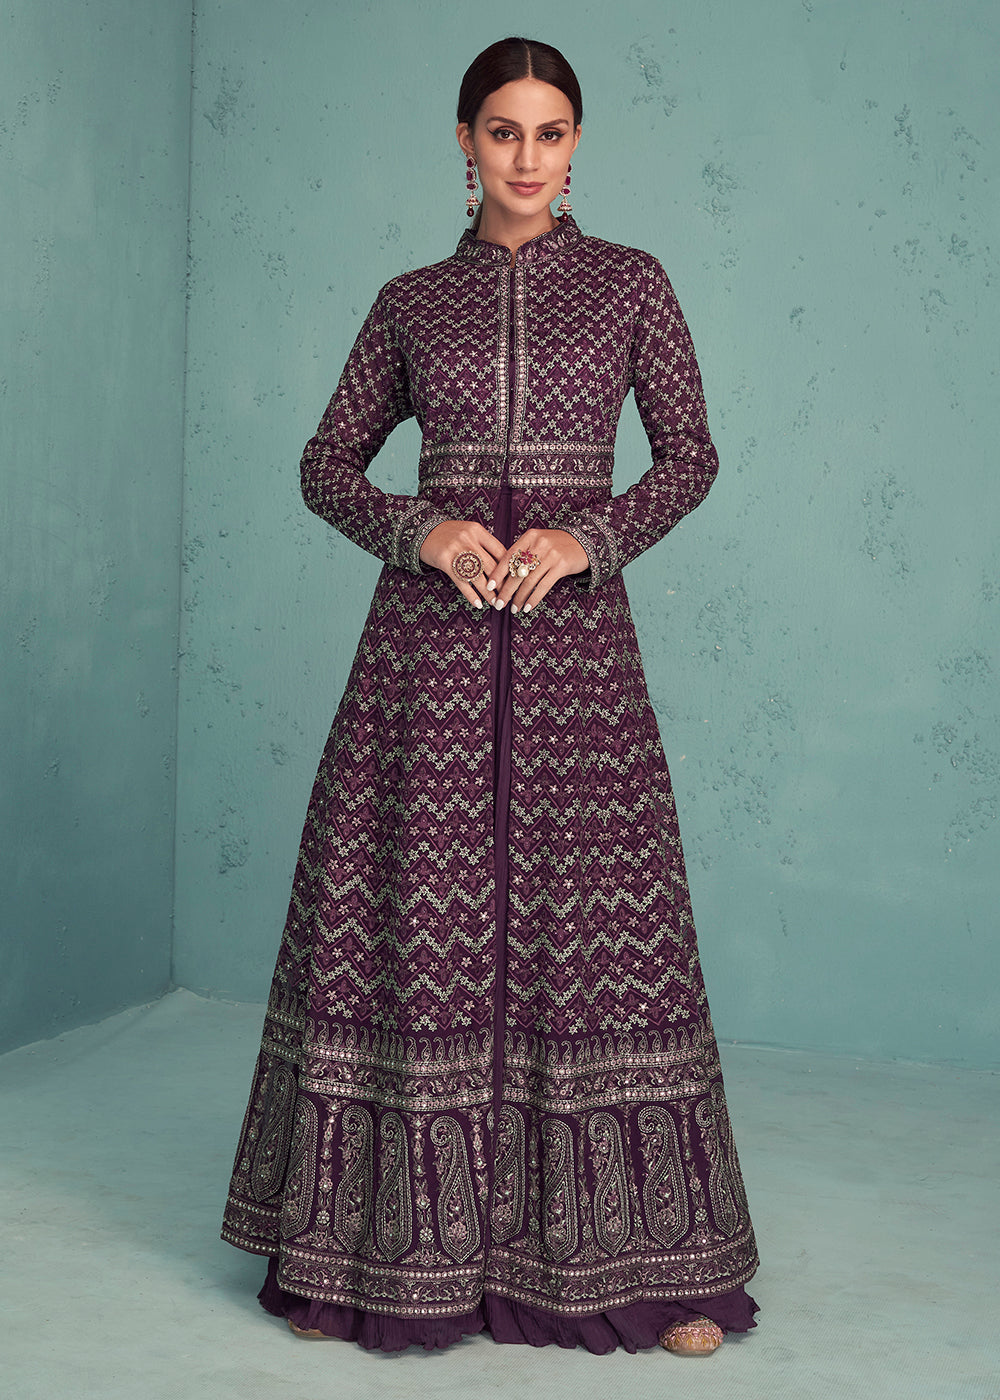 Shop Now Plum Purple Indo-Western Anarkali Style Georgette Skirt Dress Online in USA, UK, Canada & Worldwide at Empress Clothing. 